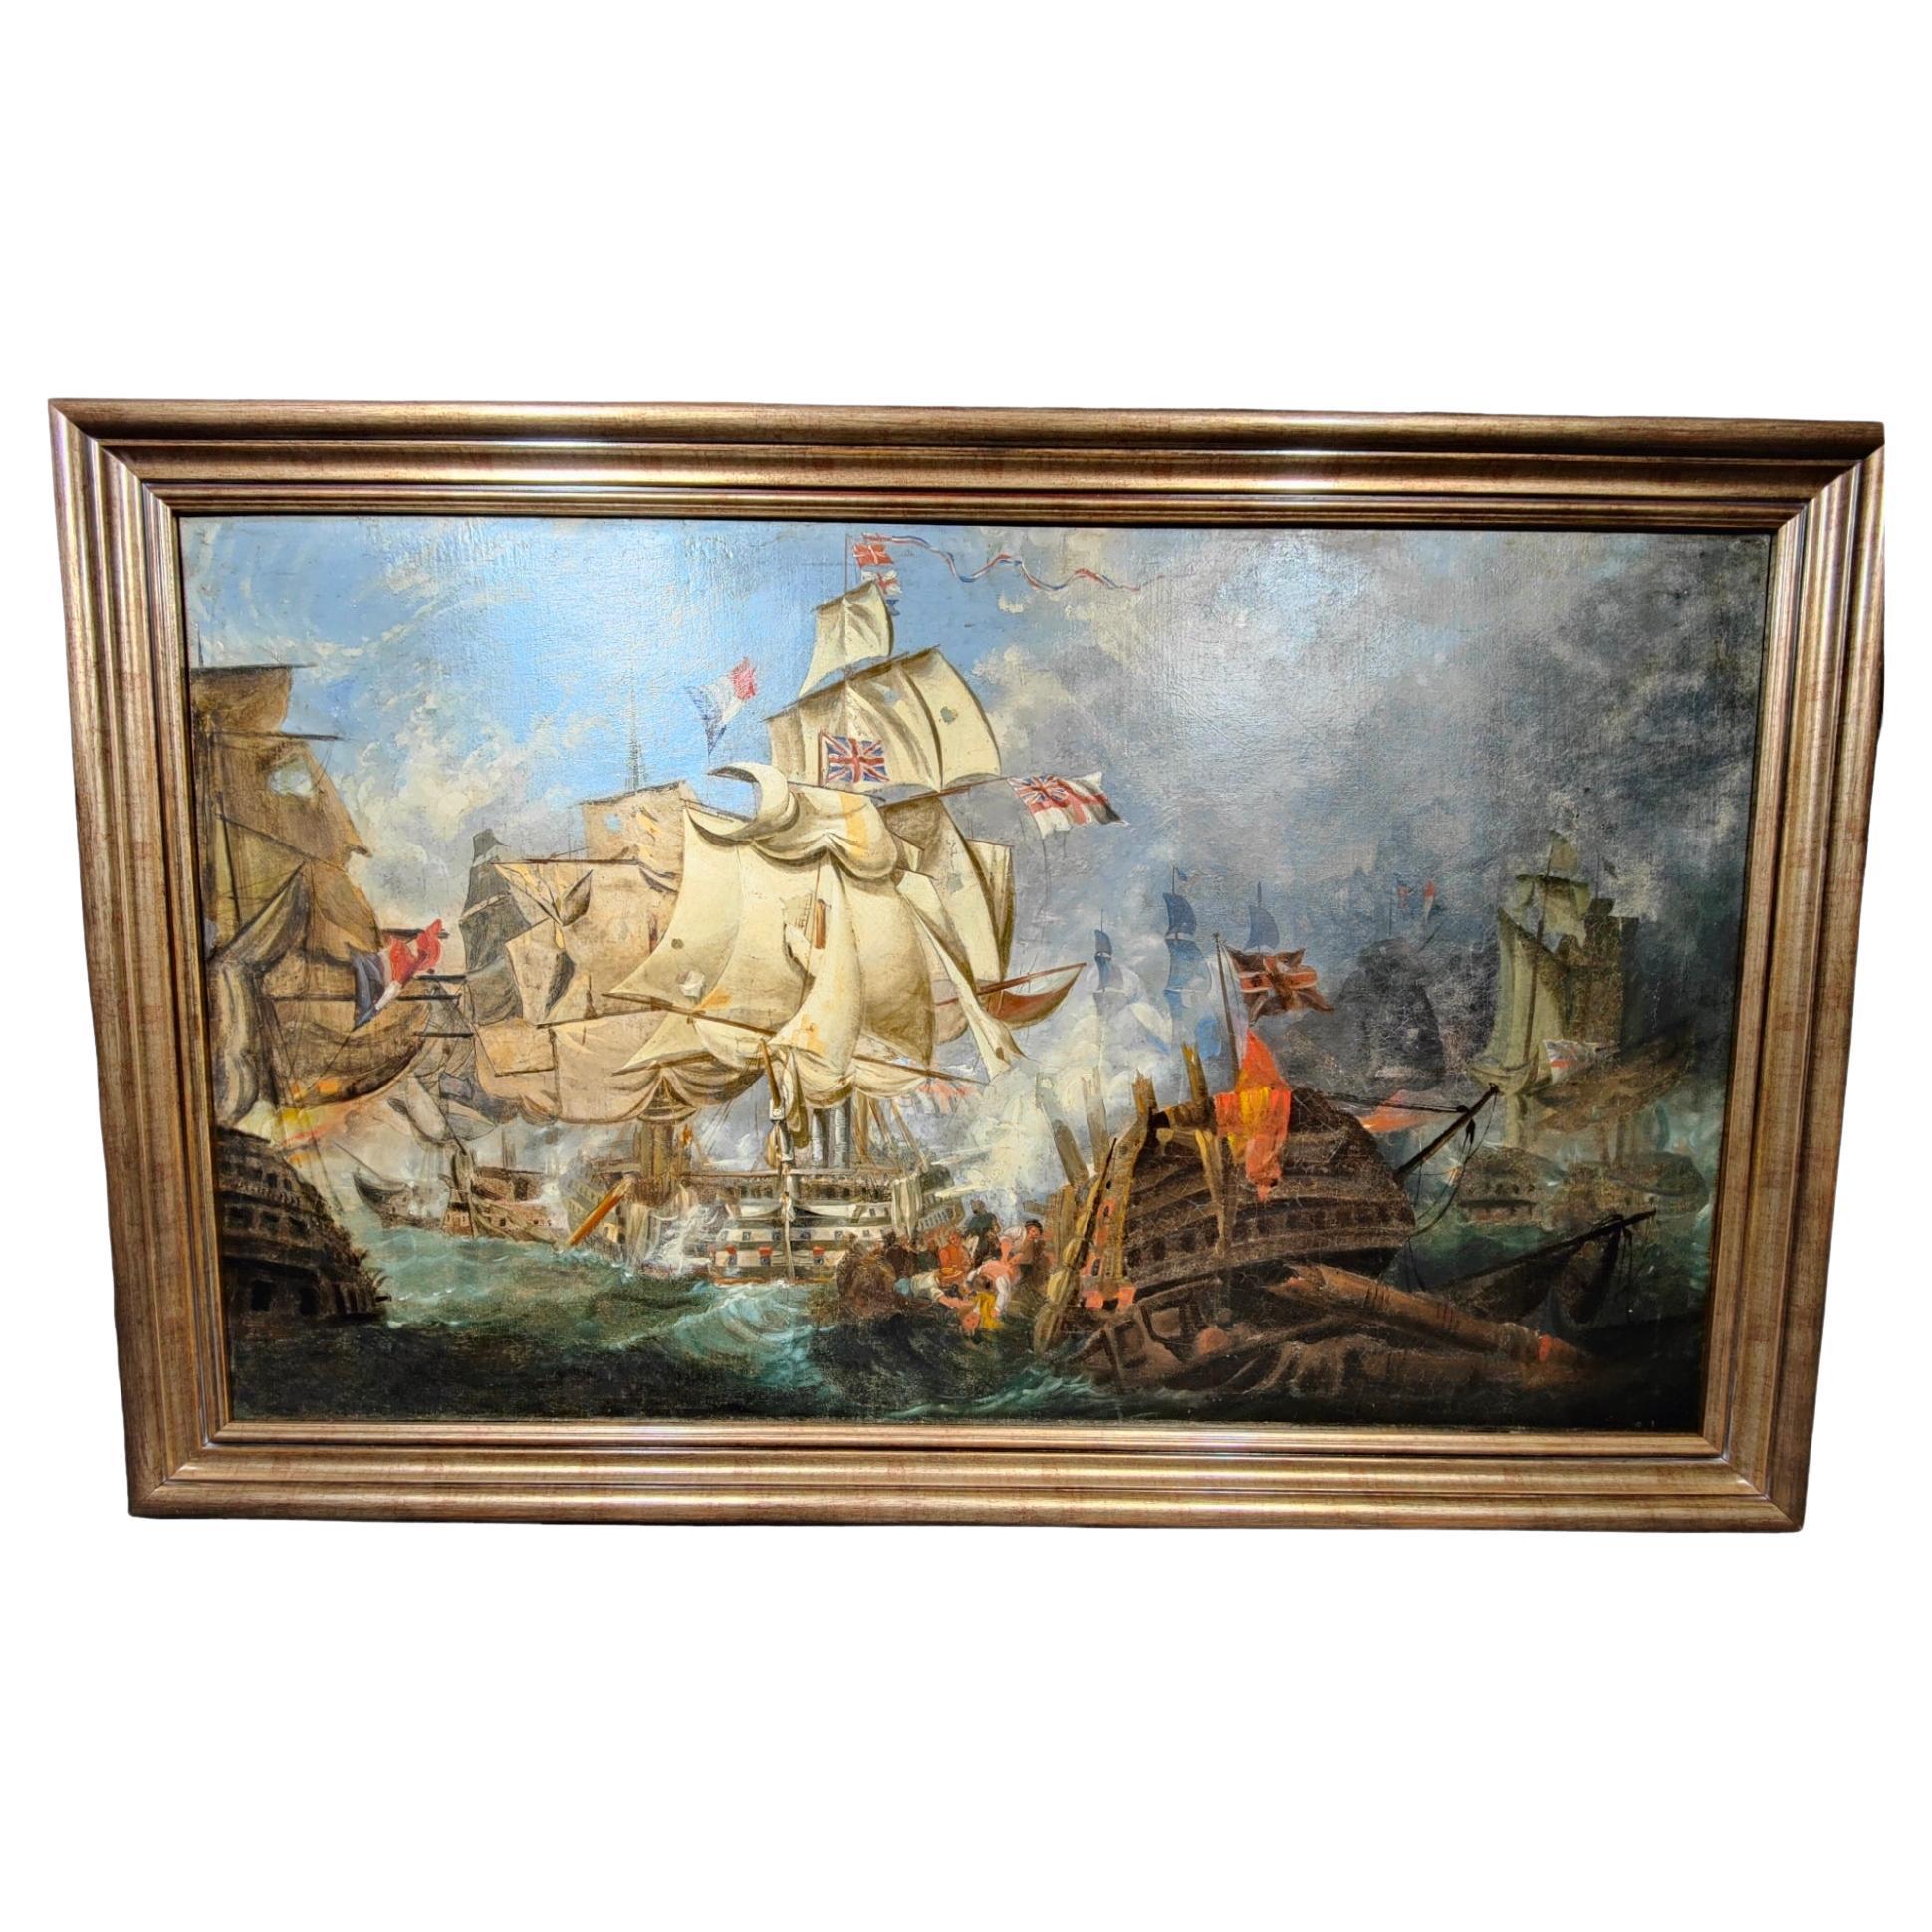 Oil On Canvas With The Battle Of Trafalgar 18th Century